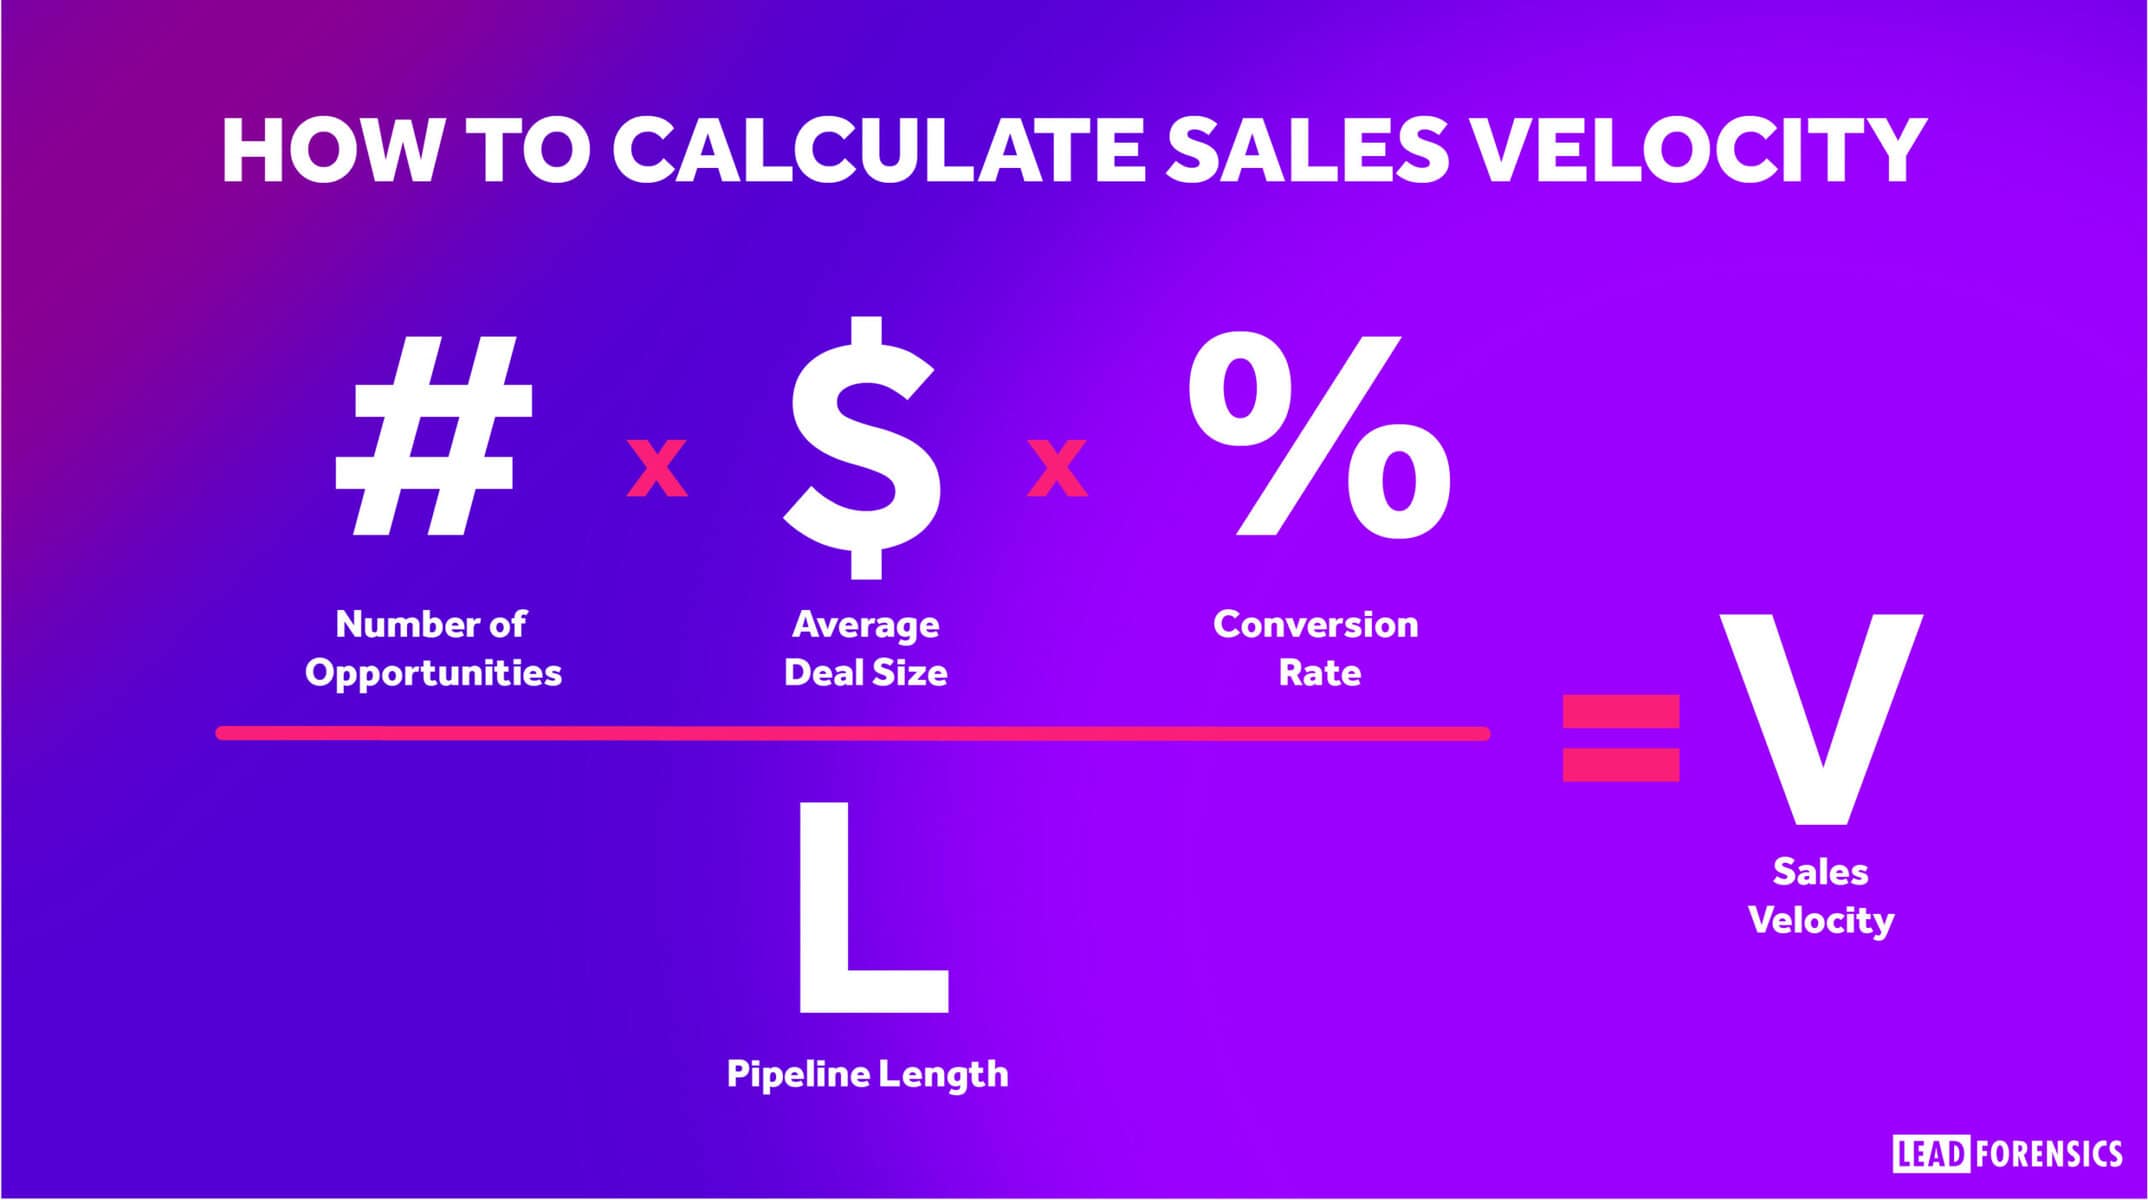 How to Calculate Sales Velocity - Sales velocity = number of opportunities x average deal size x conversion-rate ÷ pipeline length